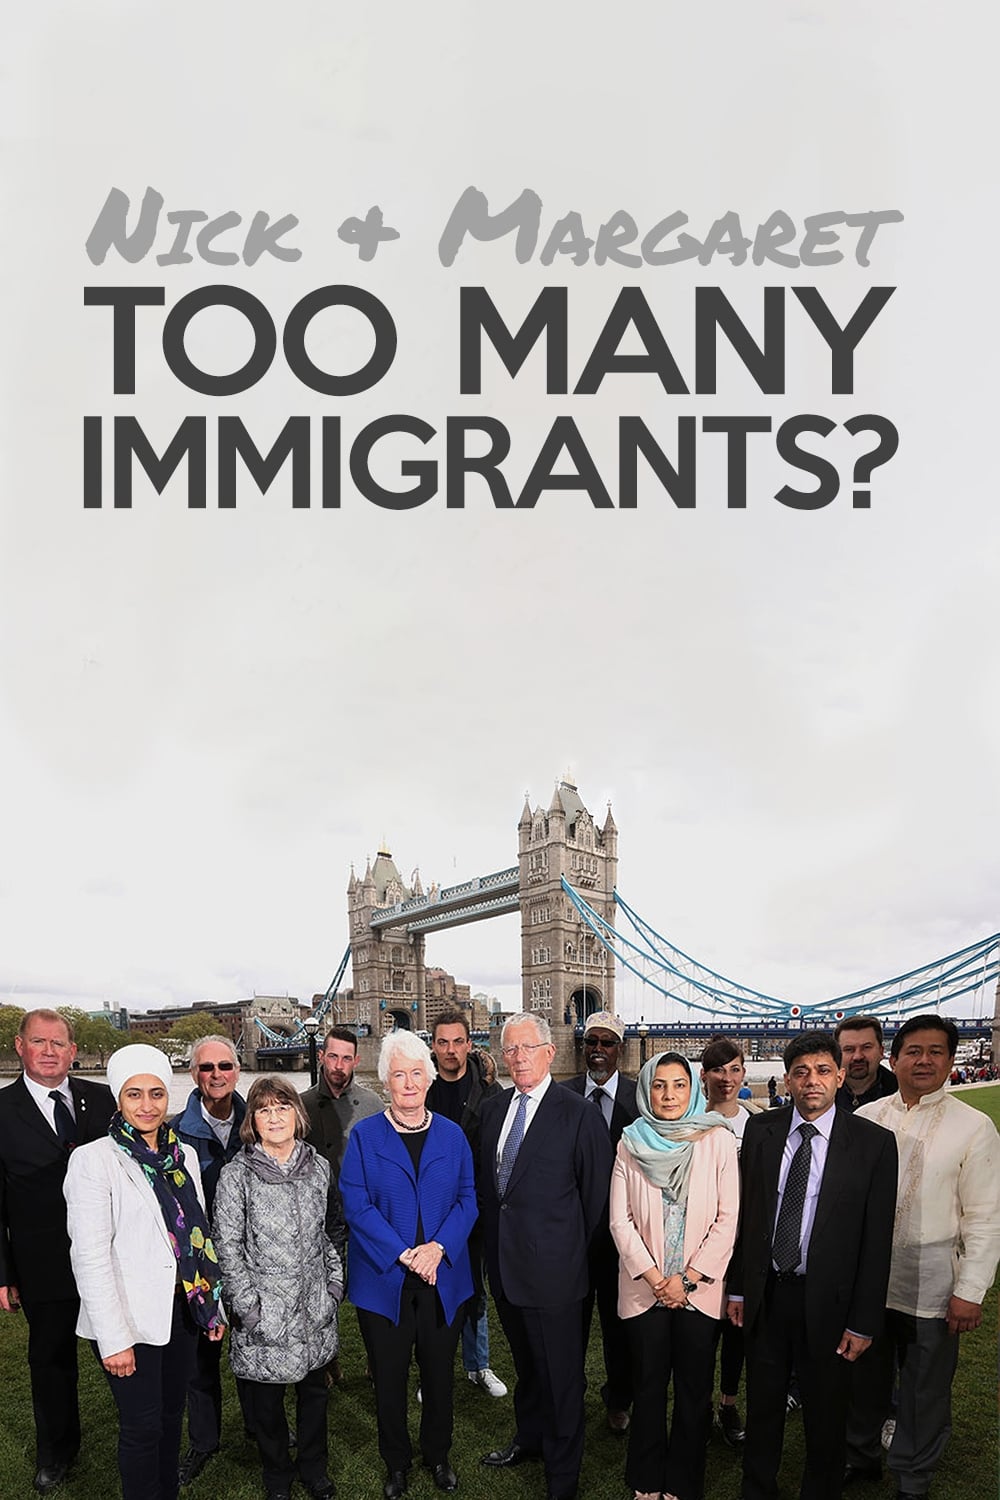 Nick and Margaret: Too Many Immigrants? TV Shows About Phobia